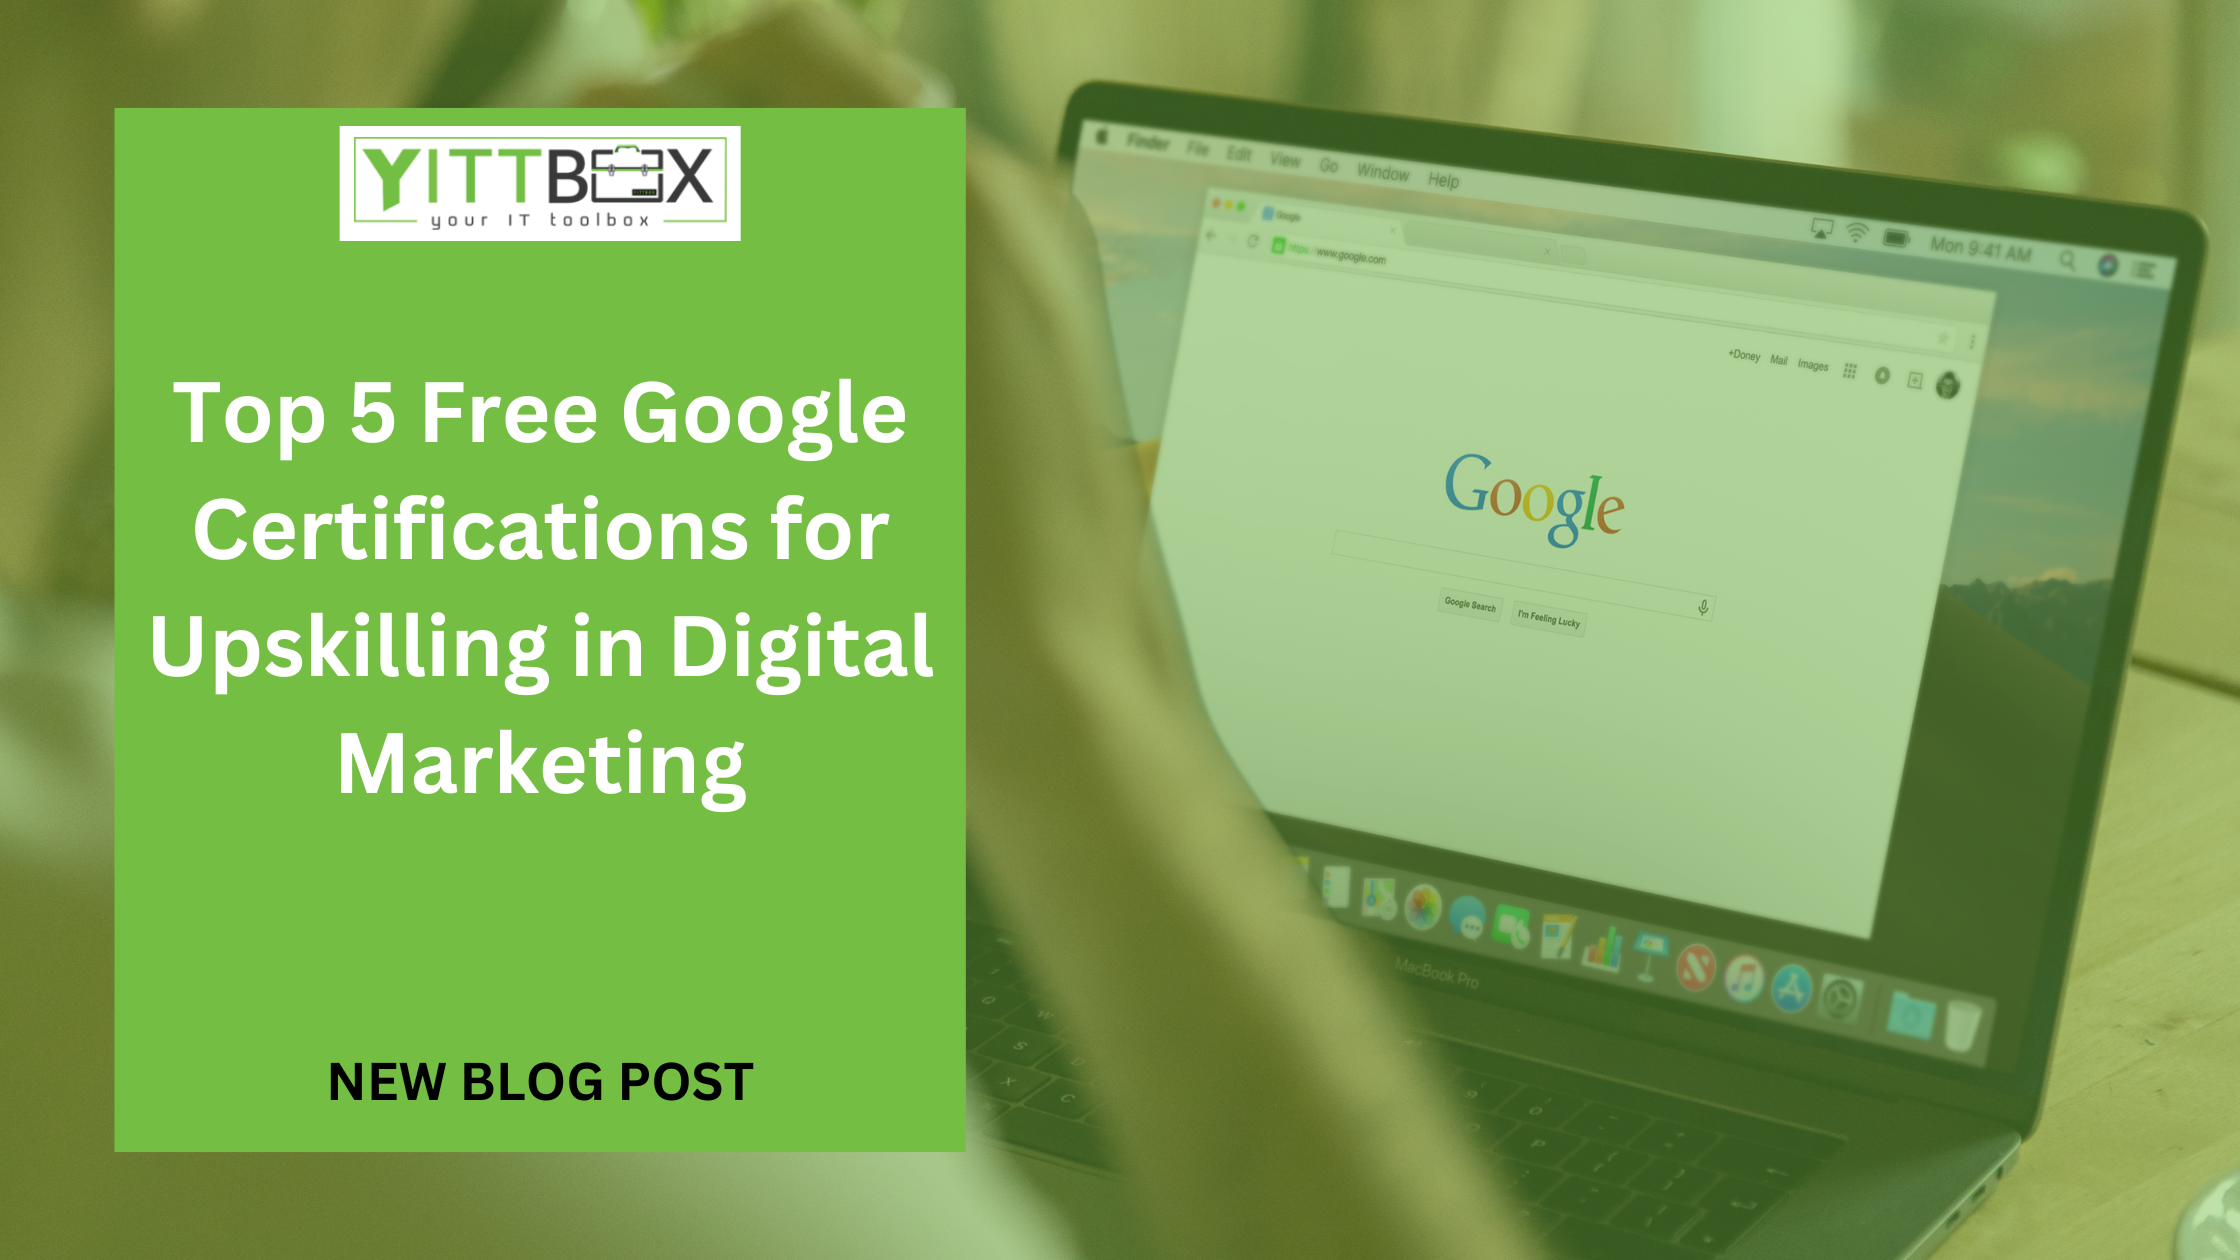 Top 5 Free Google Certifications for Upskilling in Digital Marketing